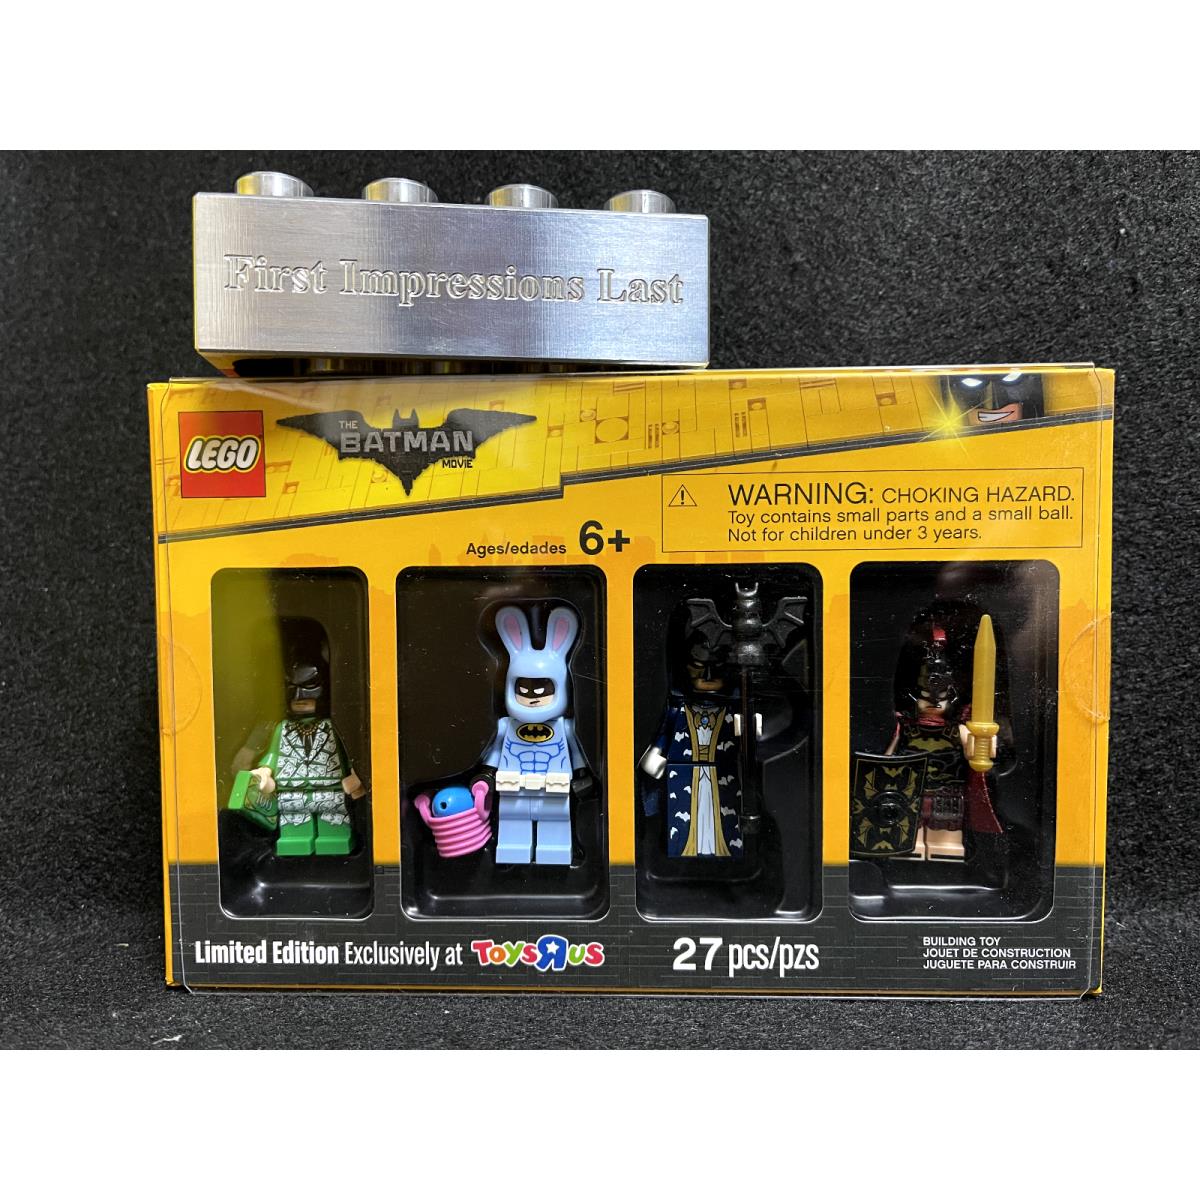 Lego 5004939 2017 The Batman Movie Toys R Us Limited Edition Minifigure Collecti